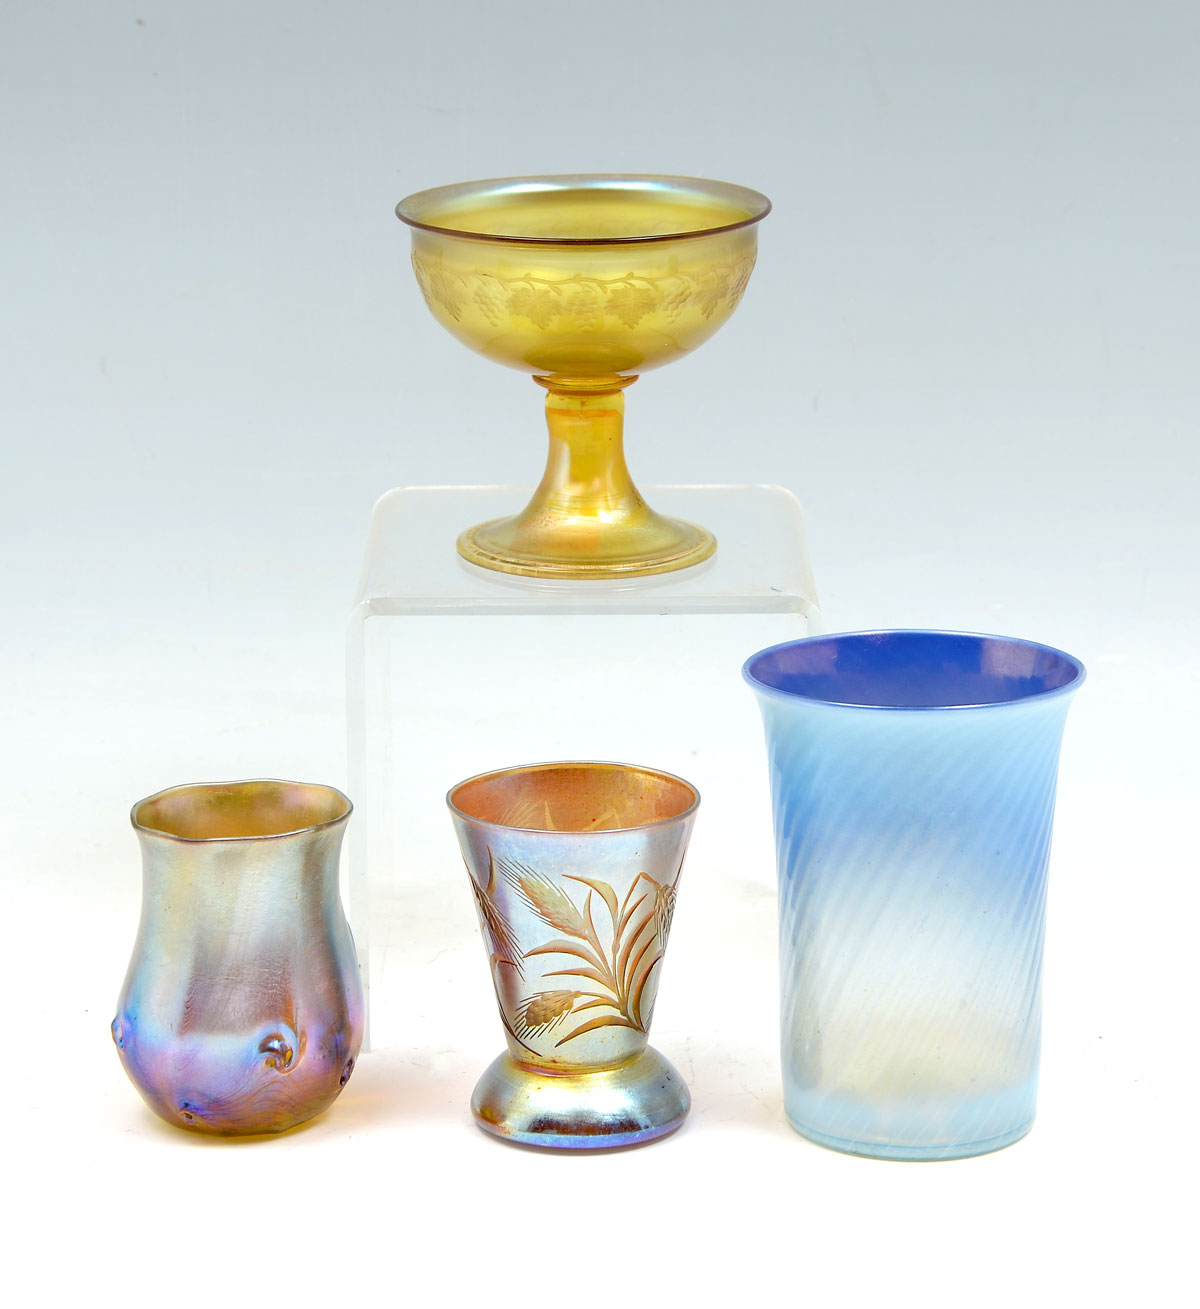 4 PC. TIFFANY ART GLASS COLLECTION: